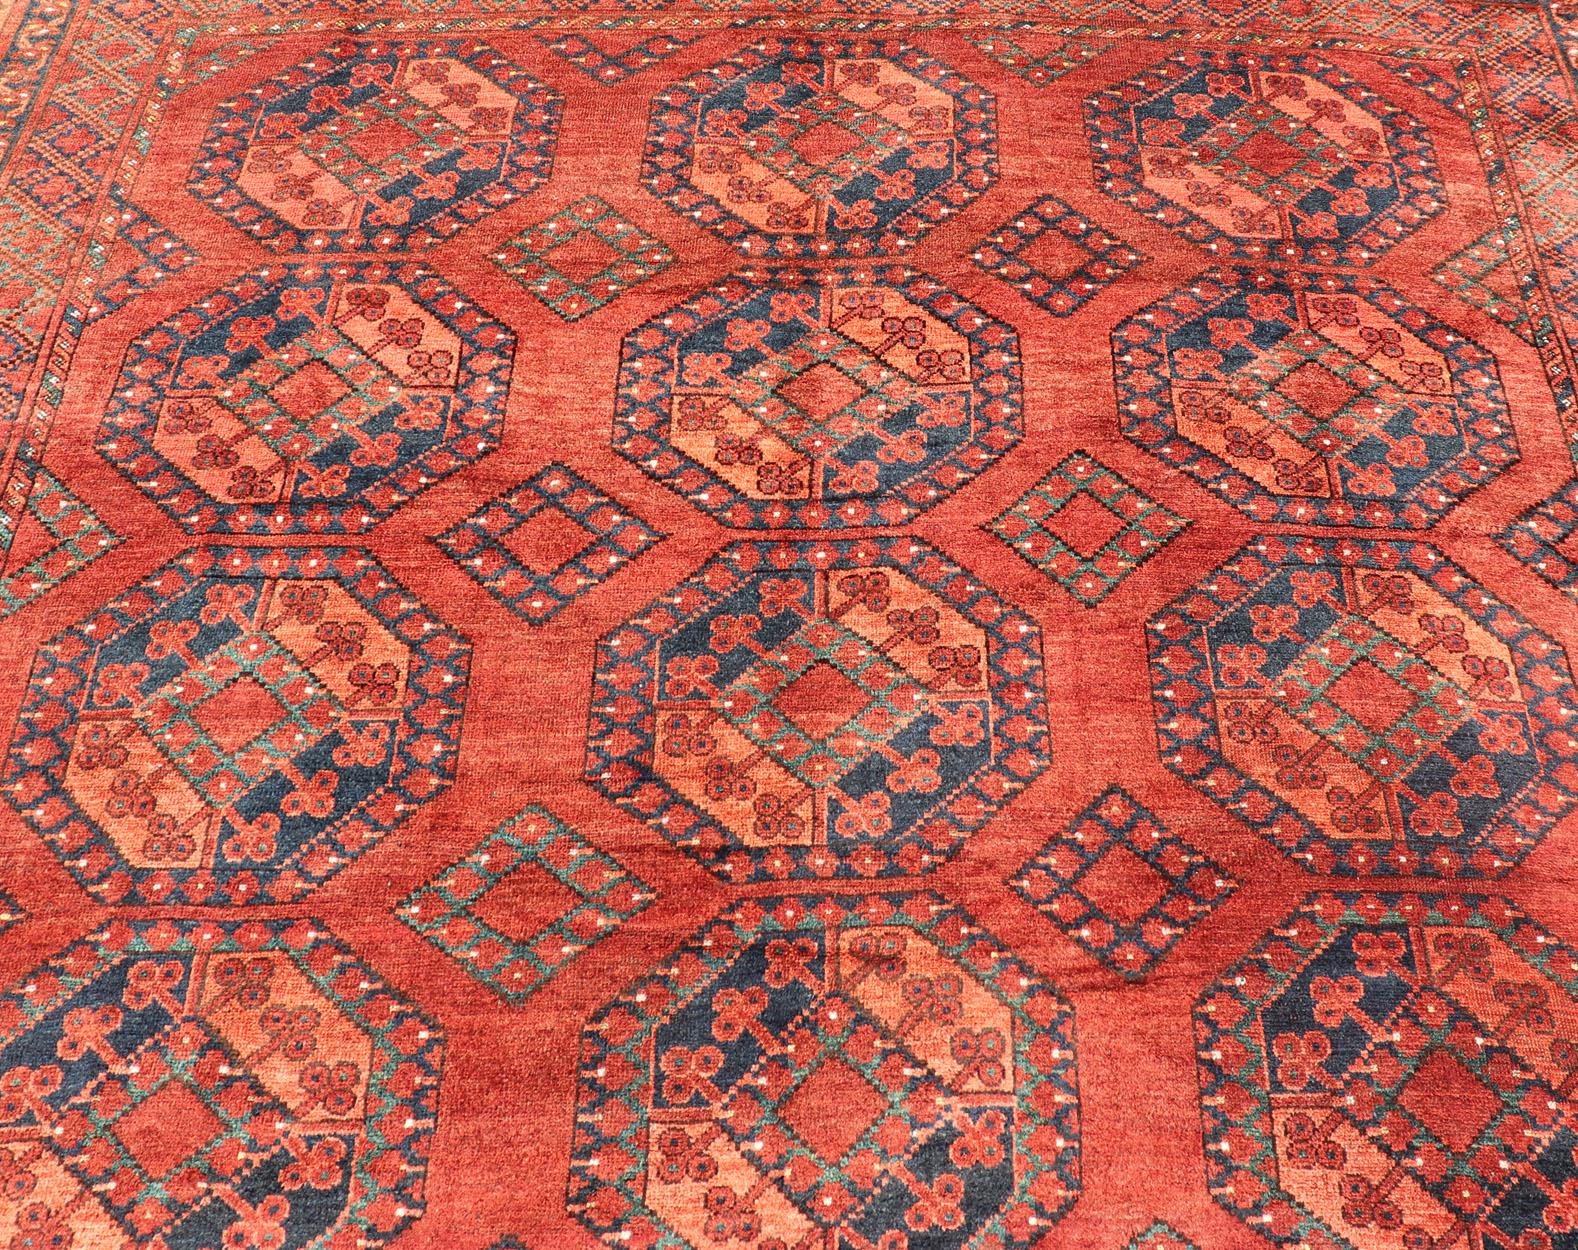 Early 20th Century Hand-Knotted Turkomen Ersari Rug in Wool with Gul Design For Sale 2